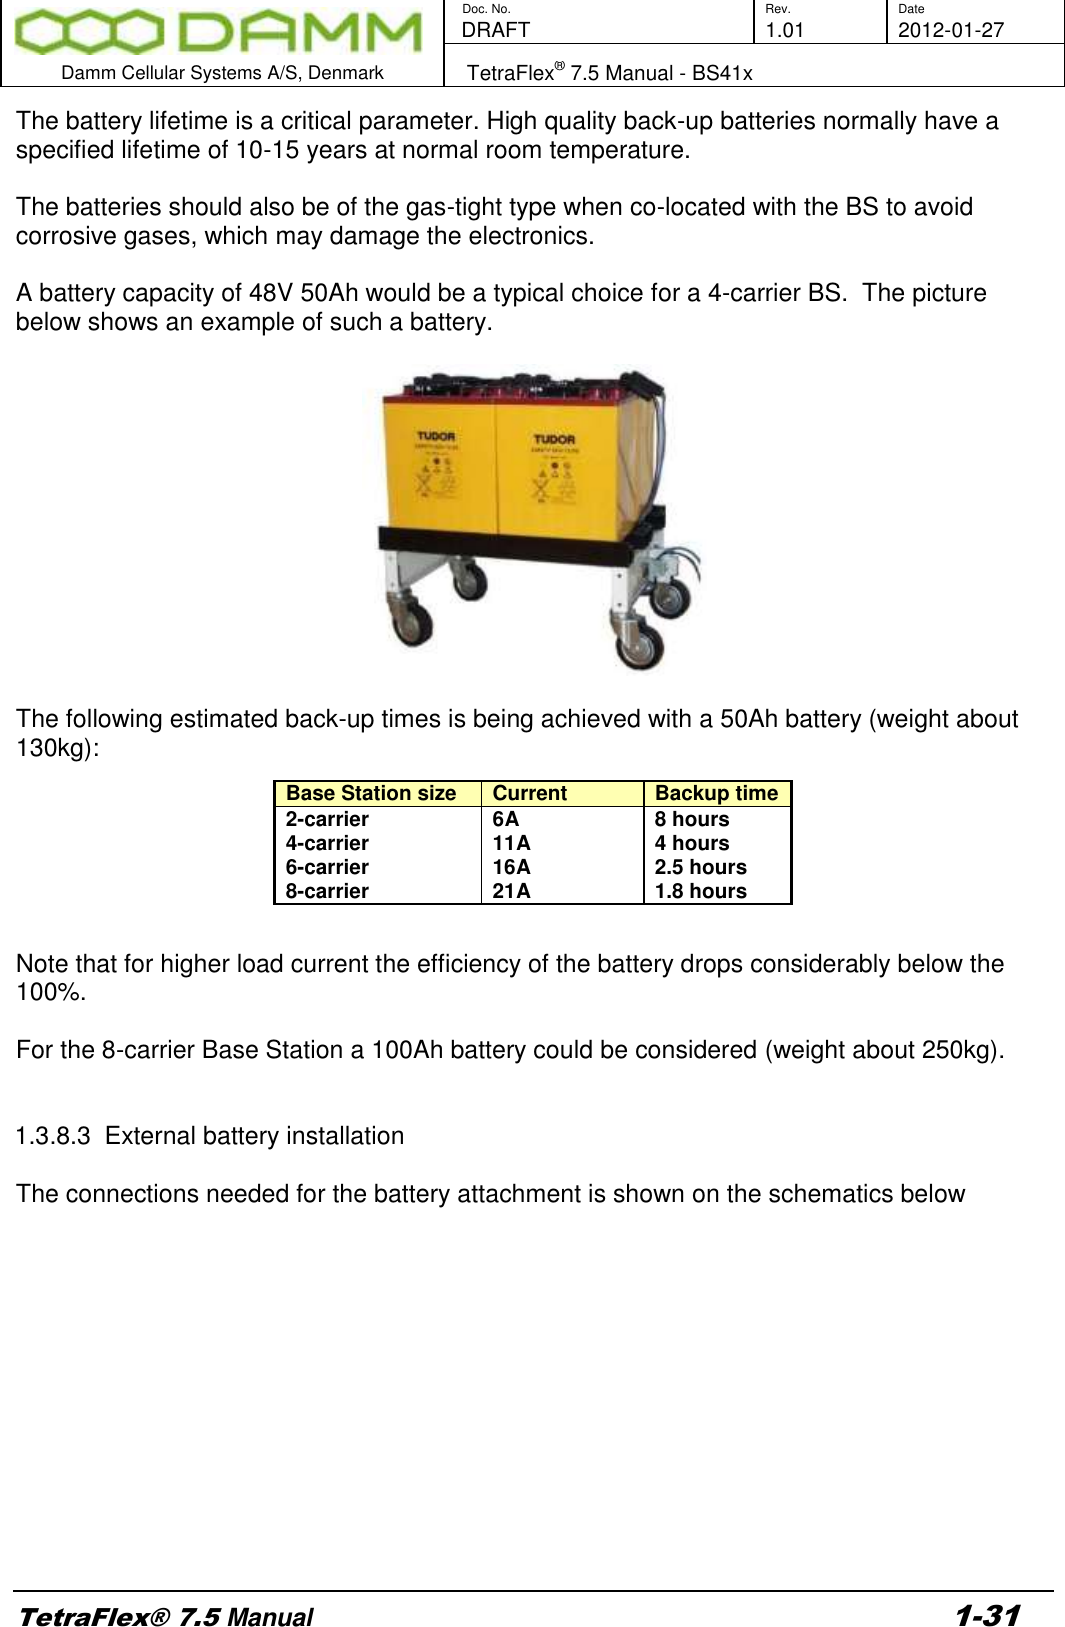        Doc. No. Rev. Date    DRAFT  1.01 2012-01-27  Damm Cellular Systems A/S, Denmark   TetraFlex® 7.5 Manual - BS41x  TetraFlex® 7.5 Manual 1-31 The battery lifetime is a critical parameter. High quality back-up batteries normally have a specified lifetime of 10-15 years at normal room temperature.  The batteries should also be of the gas-tight type when co-located with the BS to avoid corrosive gases, which may damage the electronics.  A battery capacity of 48V 50Ah would be a typical choice for a 4-carrier BS.  The picture below shows an example of such a battery.    The following estimated back-up times is being achieved with a 50Ah battery (weight about 130kg):        Note that for higher load current the efficiency of the battery drops considerably below the 100%.  For the 8-carrier Base Station a 100Ah battery could be considered (weight about 250kg).   1.3.8.3  External battery installation  The connections needed for the battery attachment is shown on the schematics below Base Station size Current  Backup time 2-carrier 6A 8 hours 4-carrier 11A 4 hours 6-carrier 16A 2.5 hours 8-carrier 21A 1.8 hours 